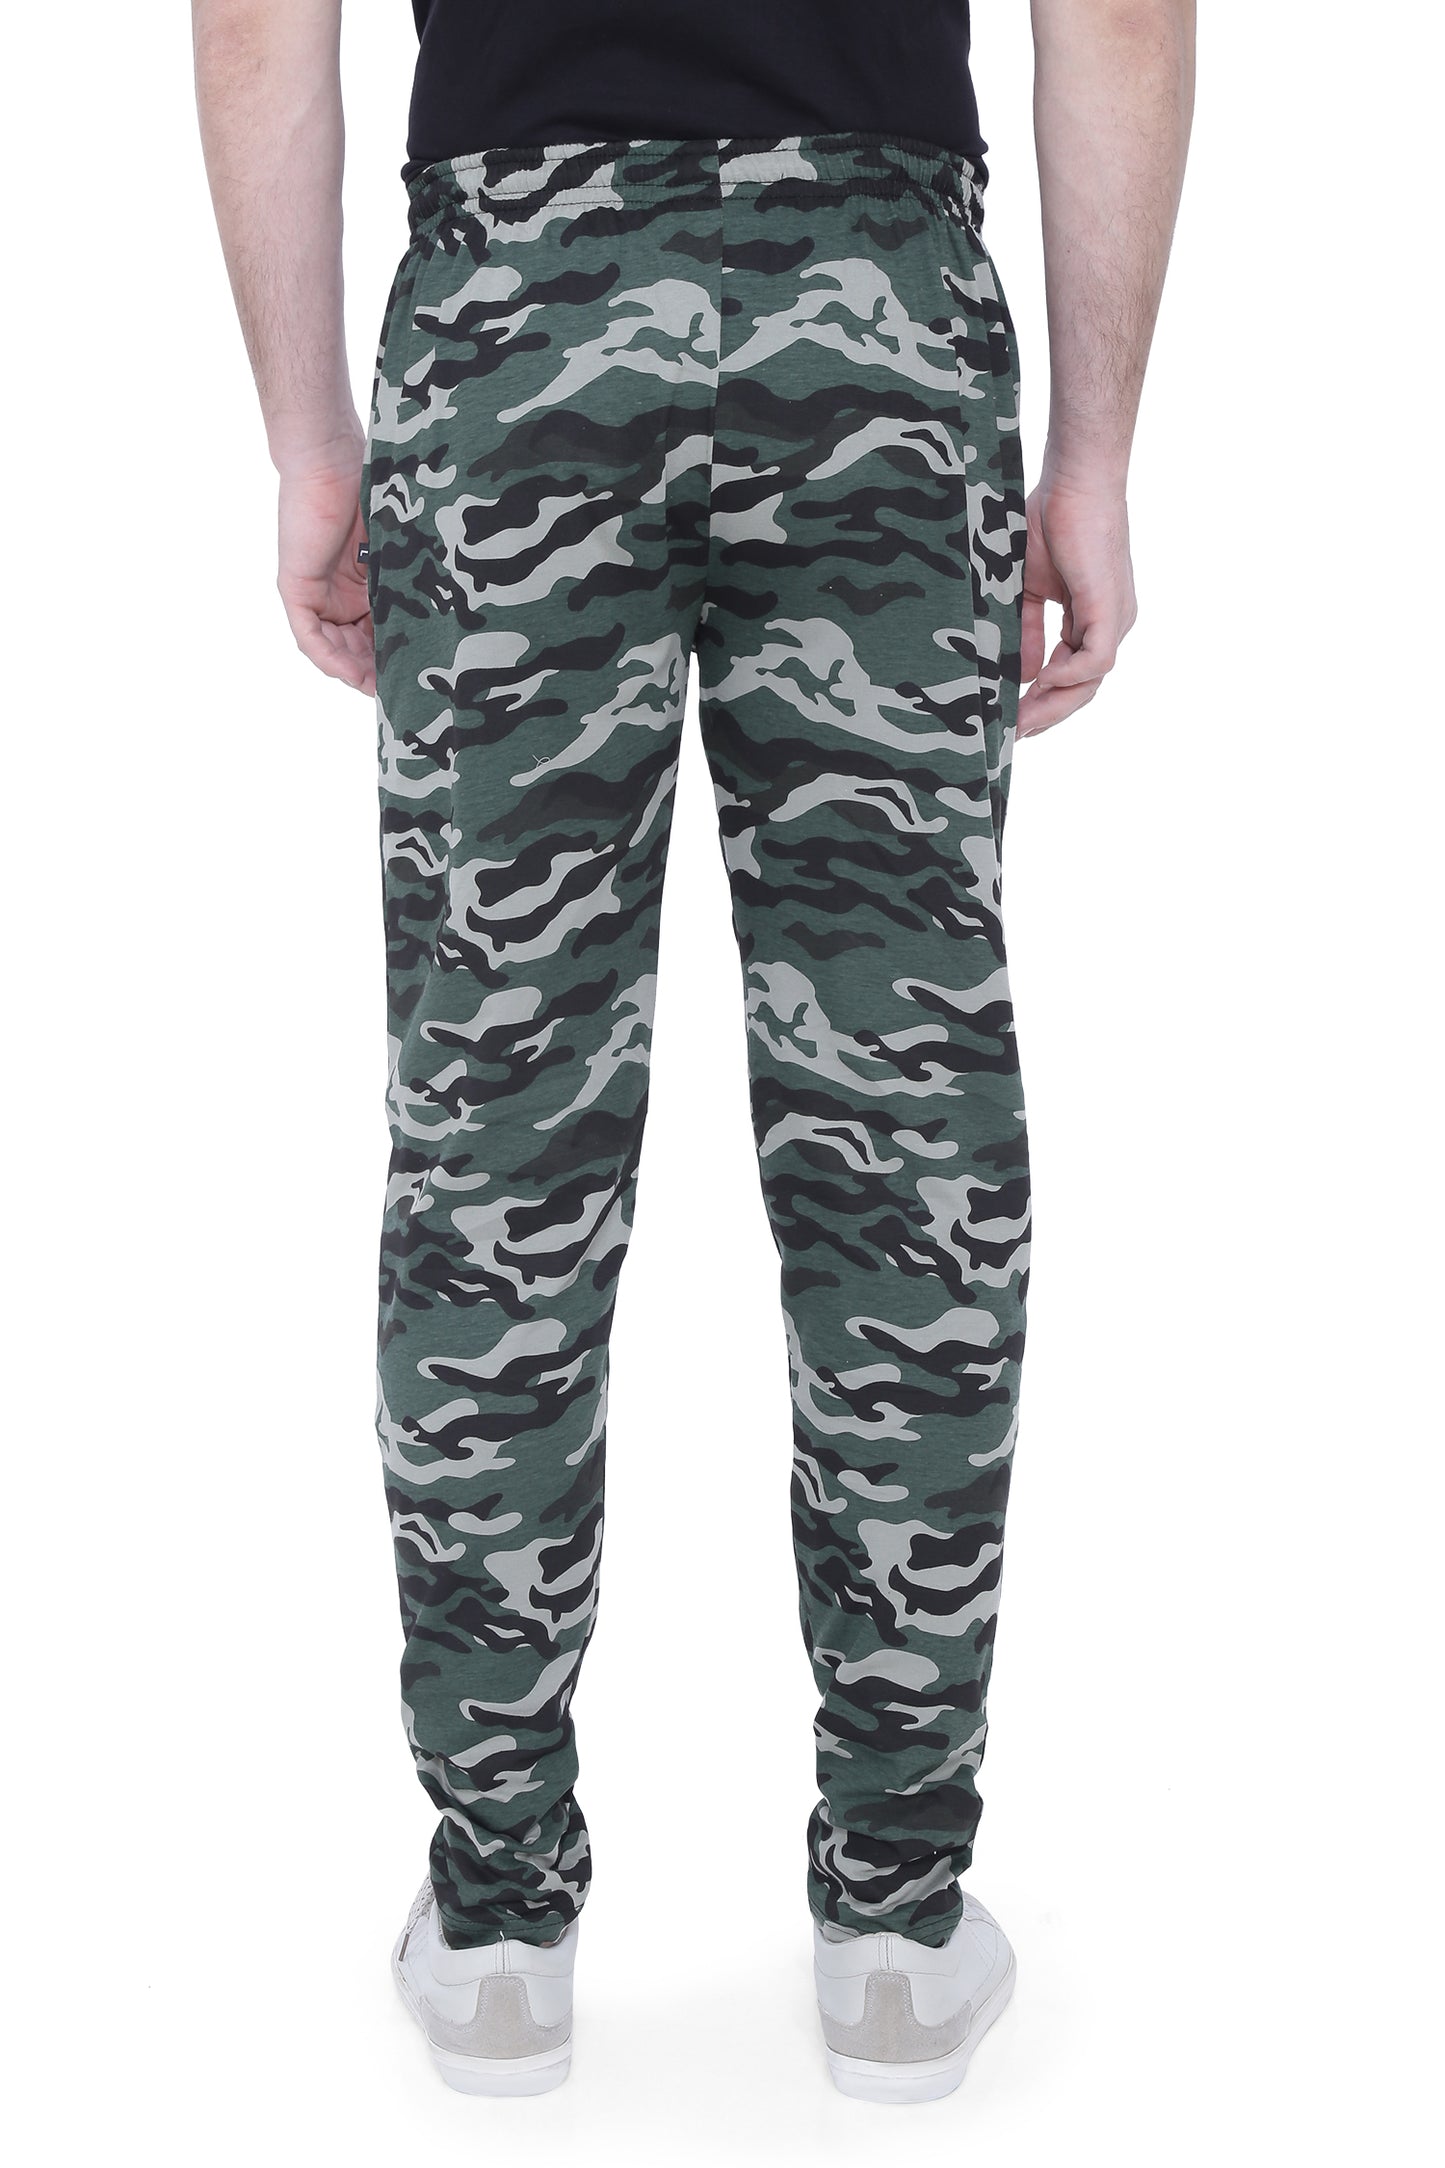 Neo Garments Men's Cotton Camouflage Track Pant. | BLACK-GREEN | SIZES FROM M TO 5XL.